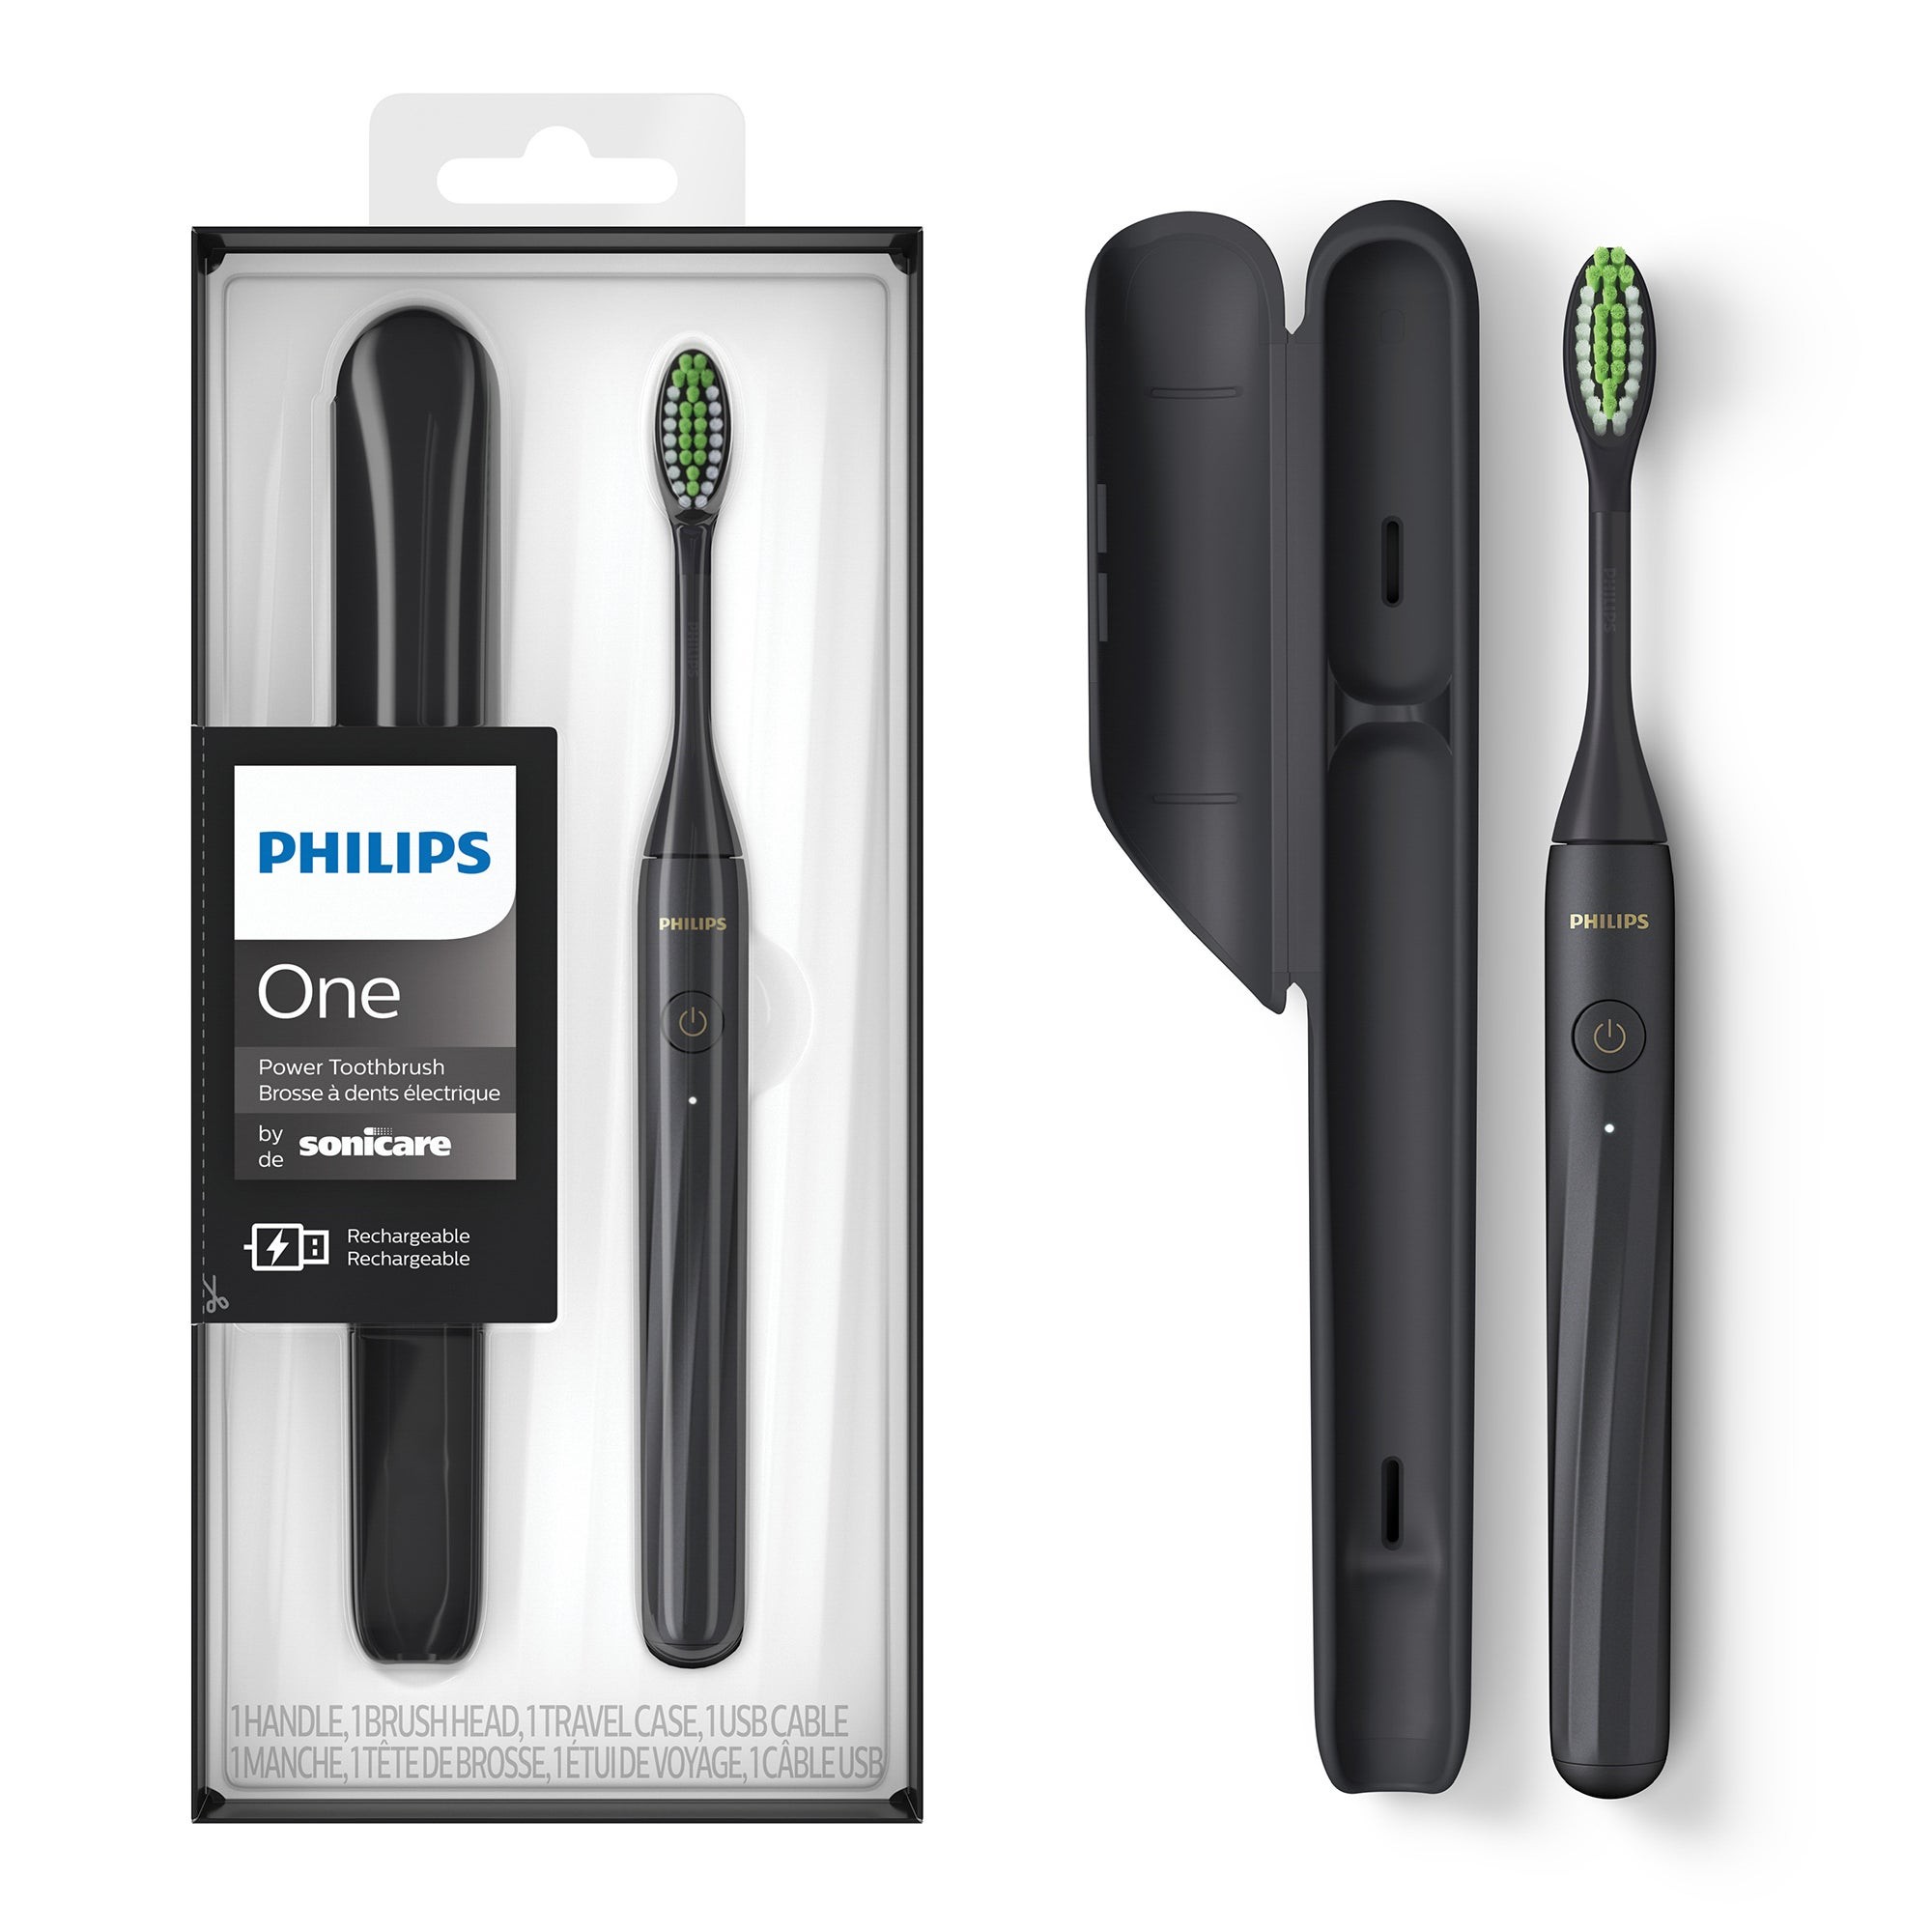 Philips One Rechargeable Toothbrush Black